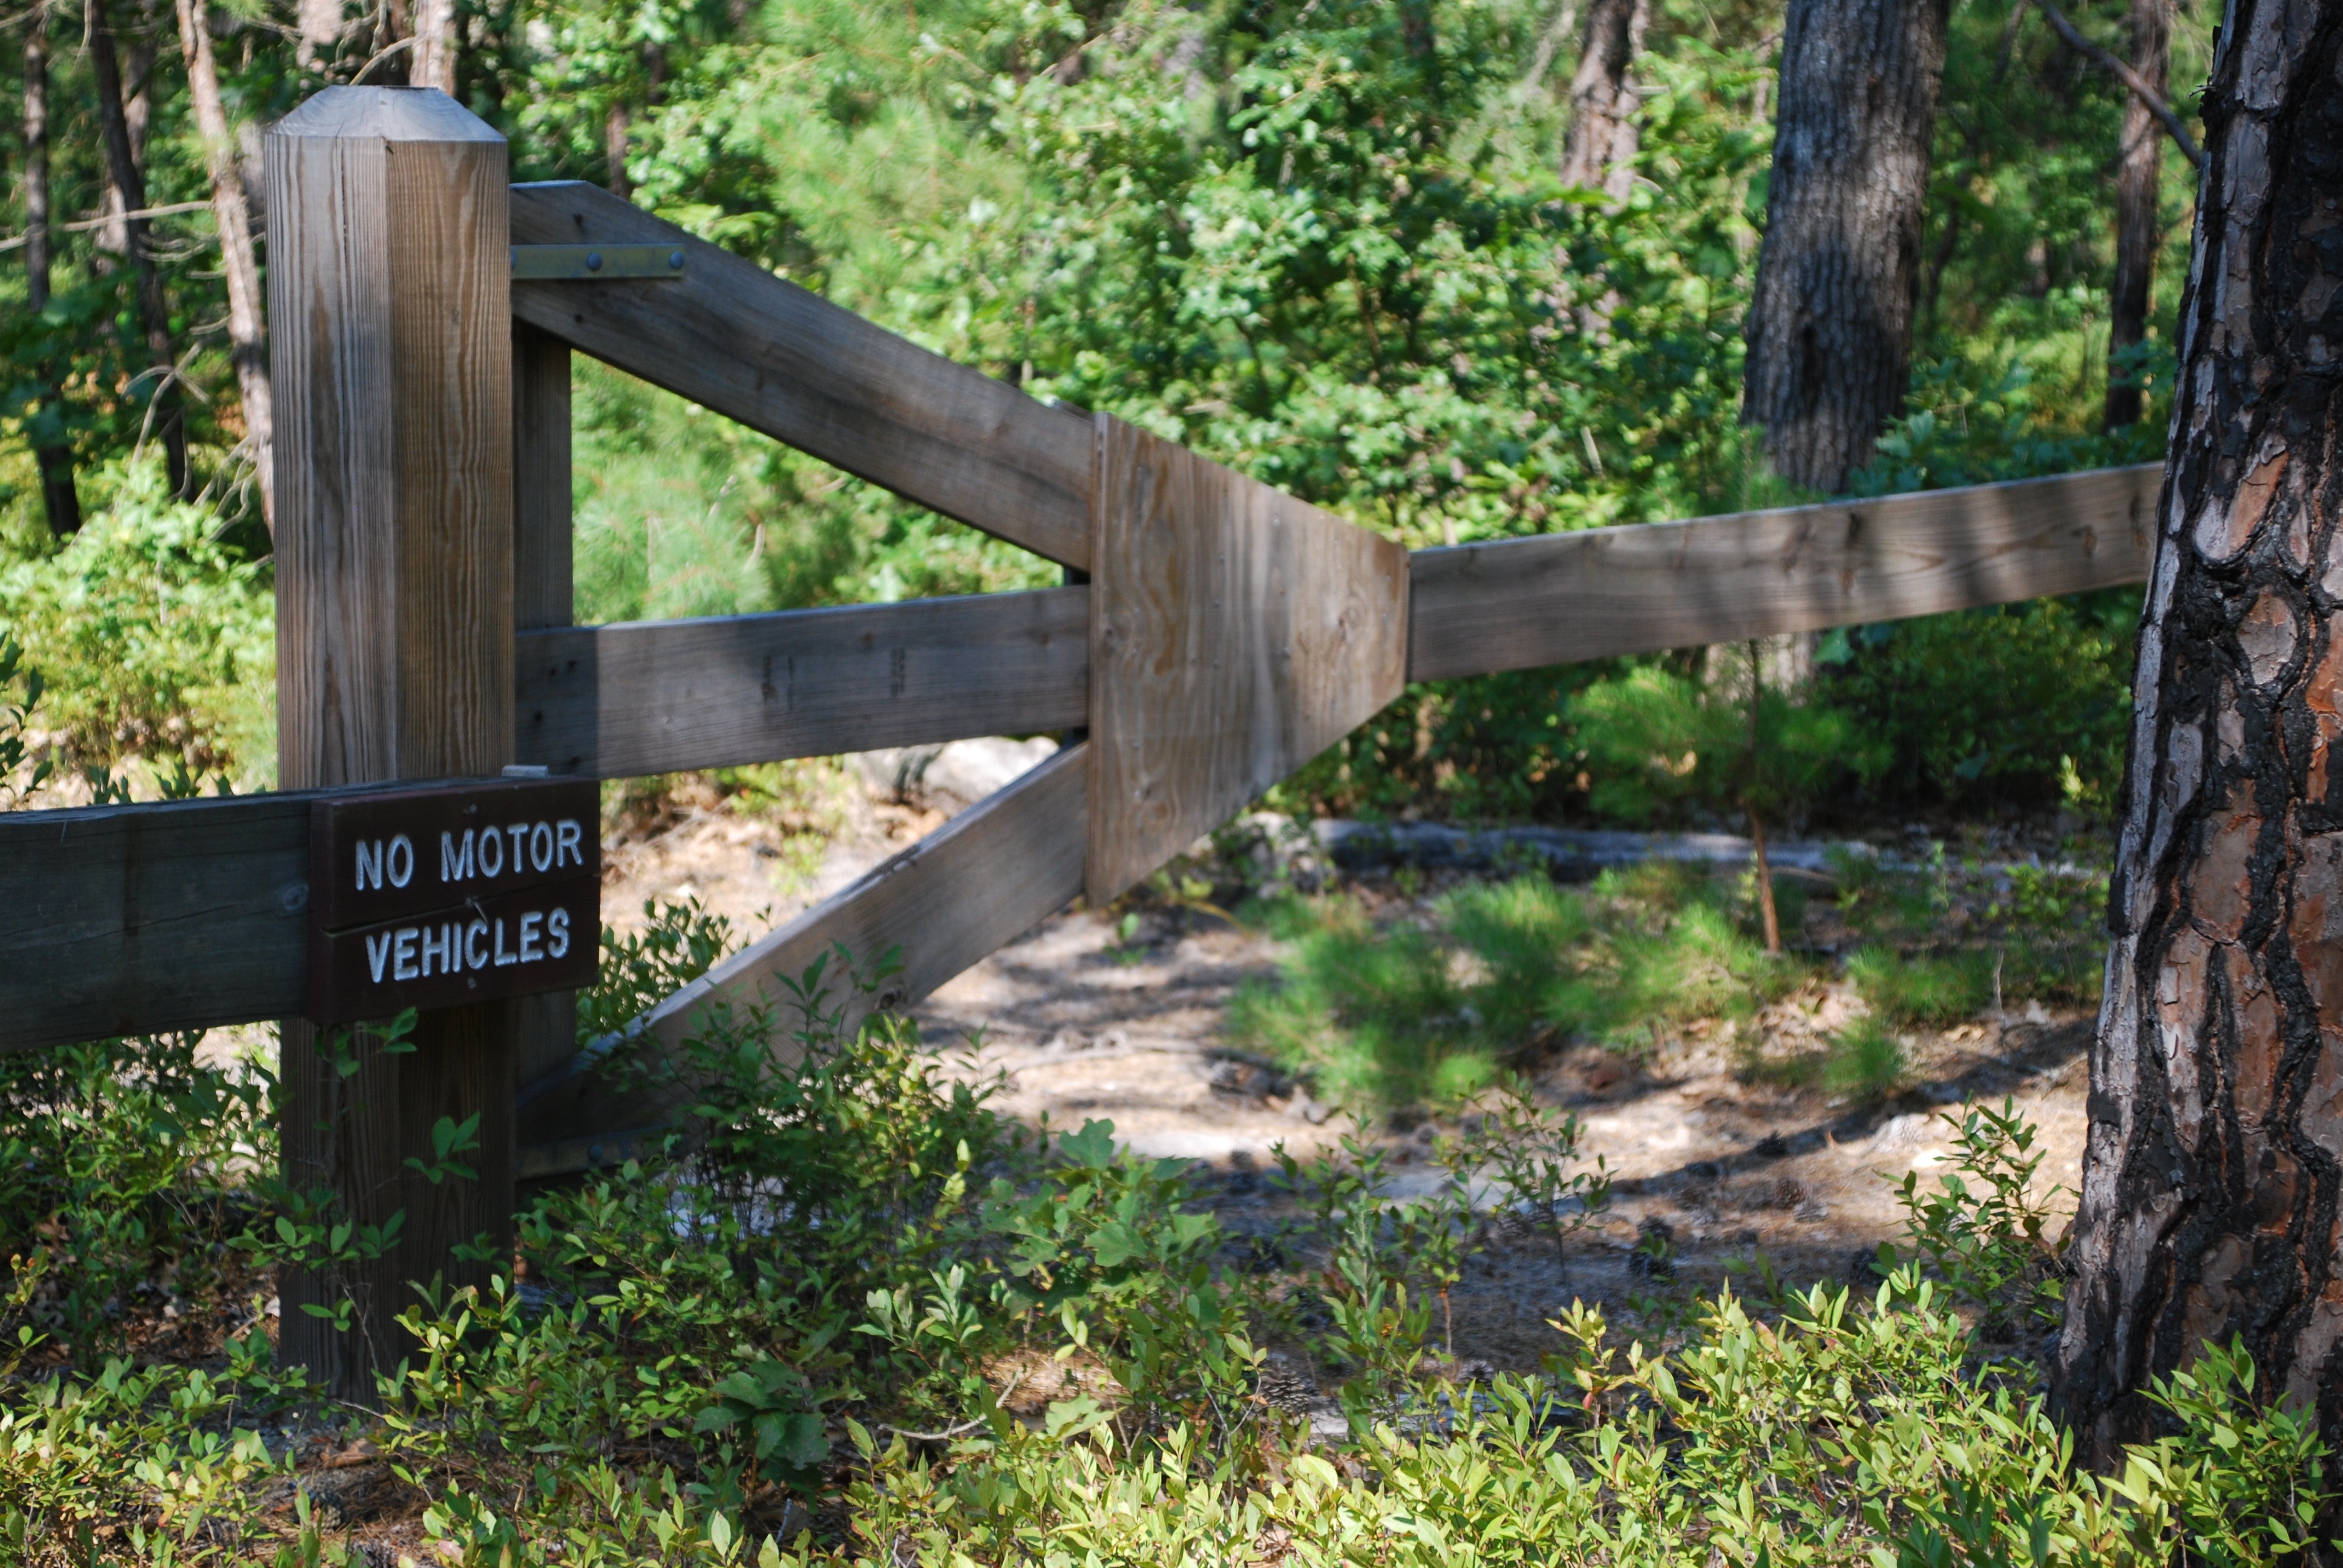 Off-road drivers still battling conservationists on Pinelands access